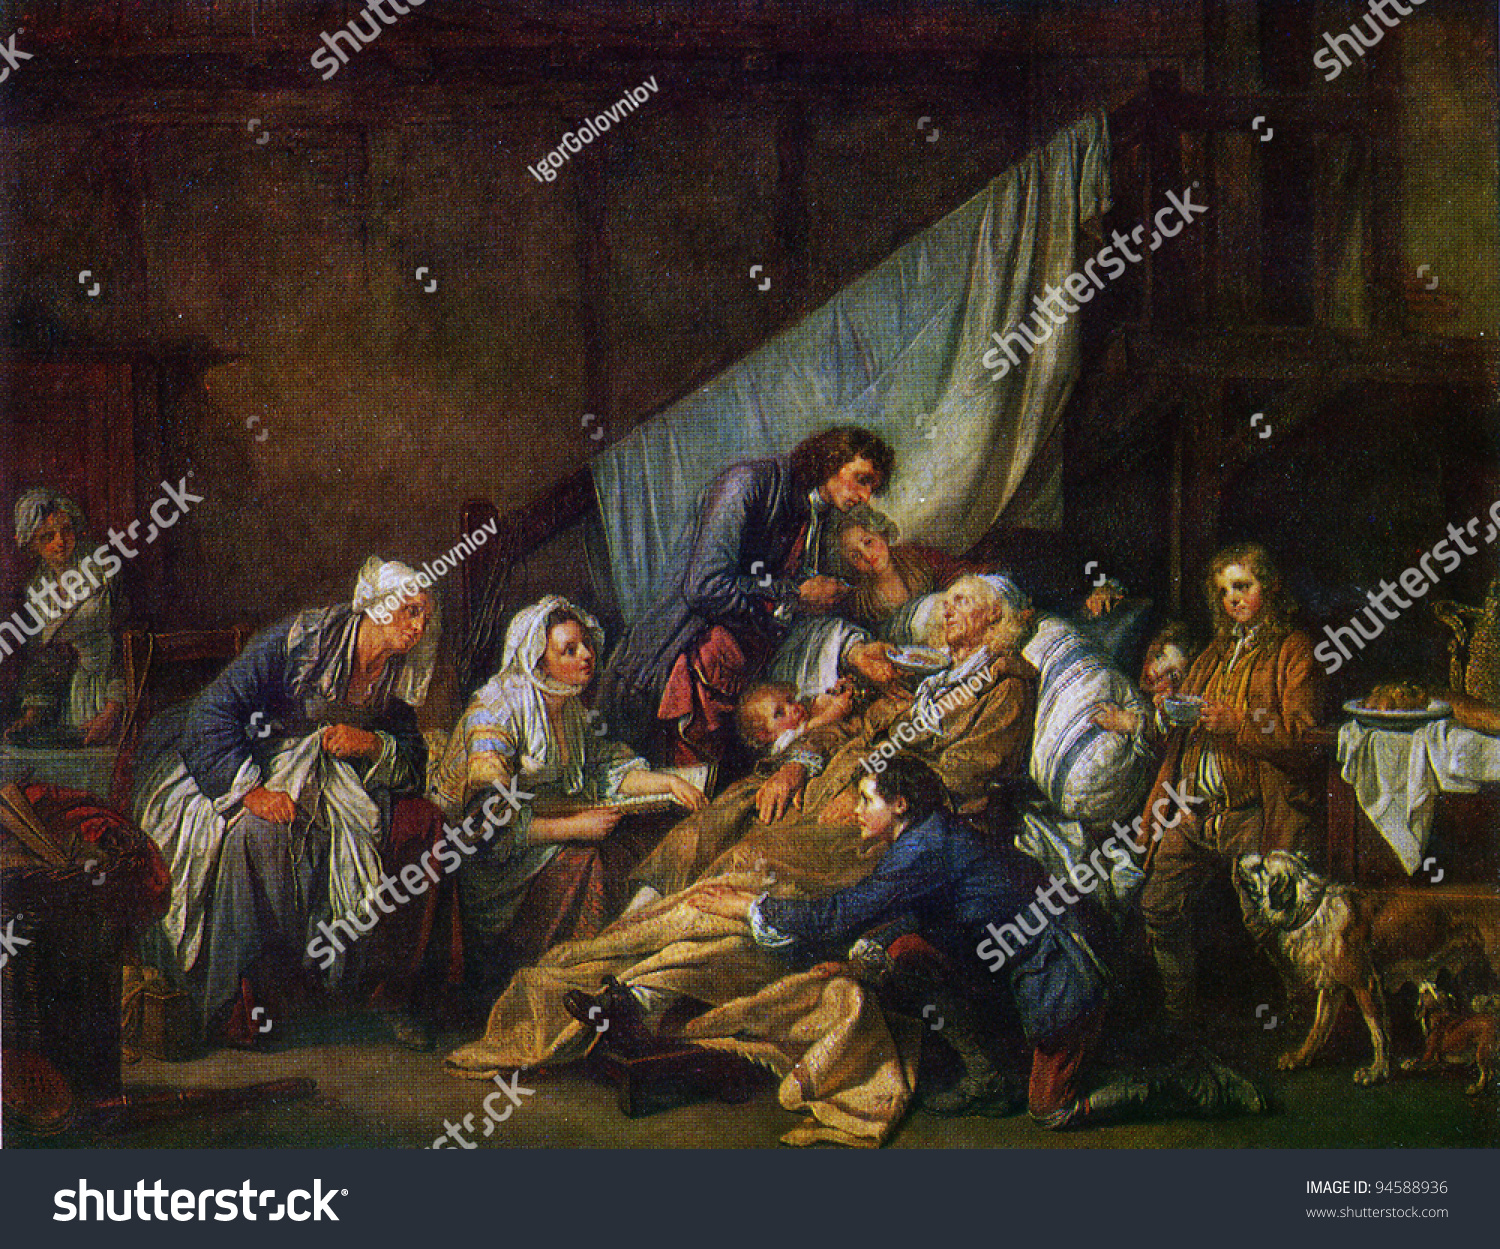 USSR  - CIRCA 1981: Postcard shows draw by Jean-Baptiste Greuze - Paralytic Tended by His Children, The Hermitage, St Peterburg circa 1981 #94588936